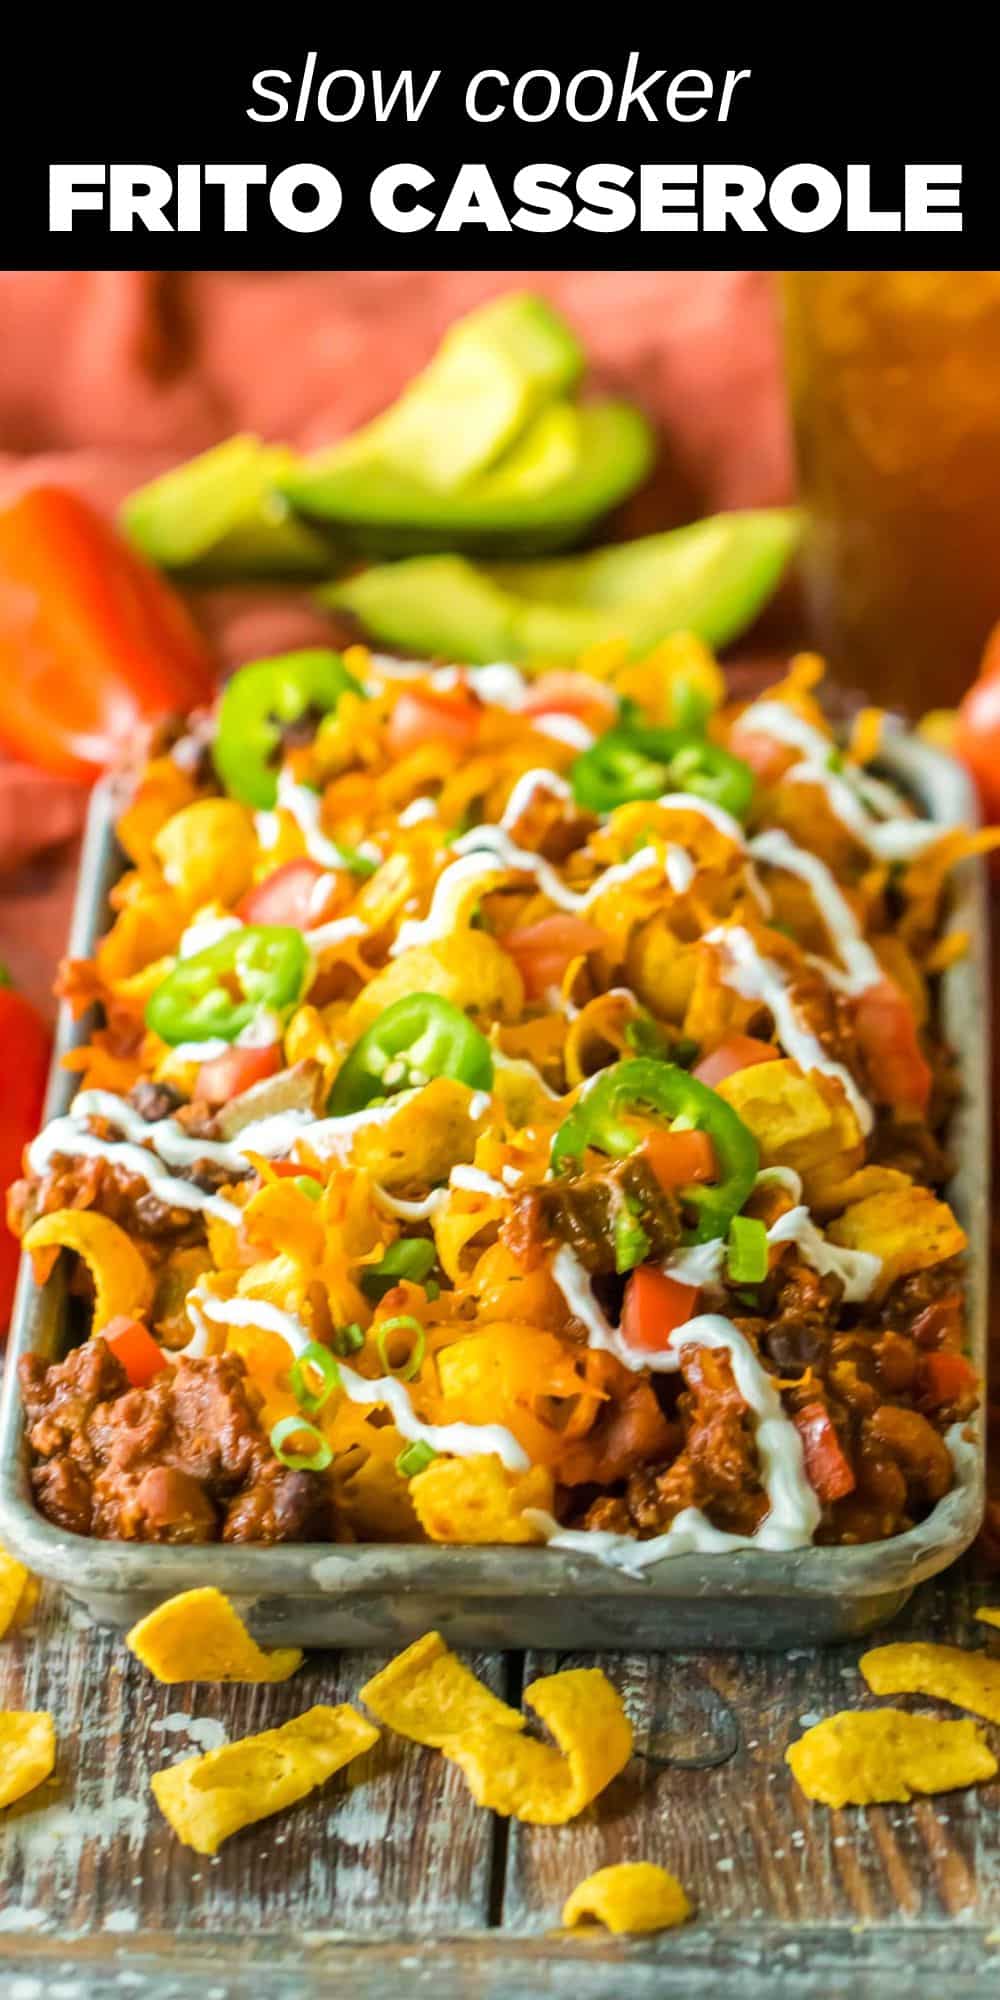 This Slow Cooker Frito Casserole features a delicious homemade chili that slow cooks to perfection before getting topped with crunchy Frito corn chips and gooey cheese. Served with all your favorite toppings, this casserole is comfort food at its finest!  